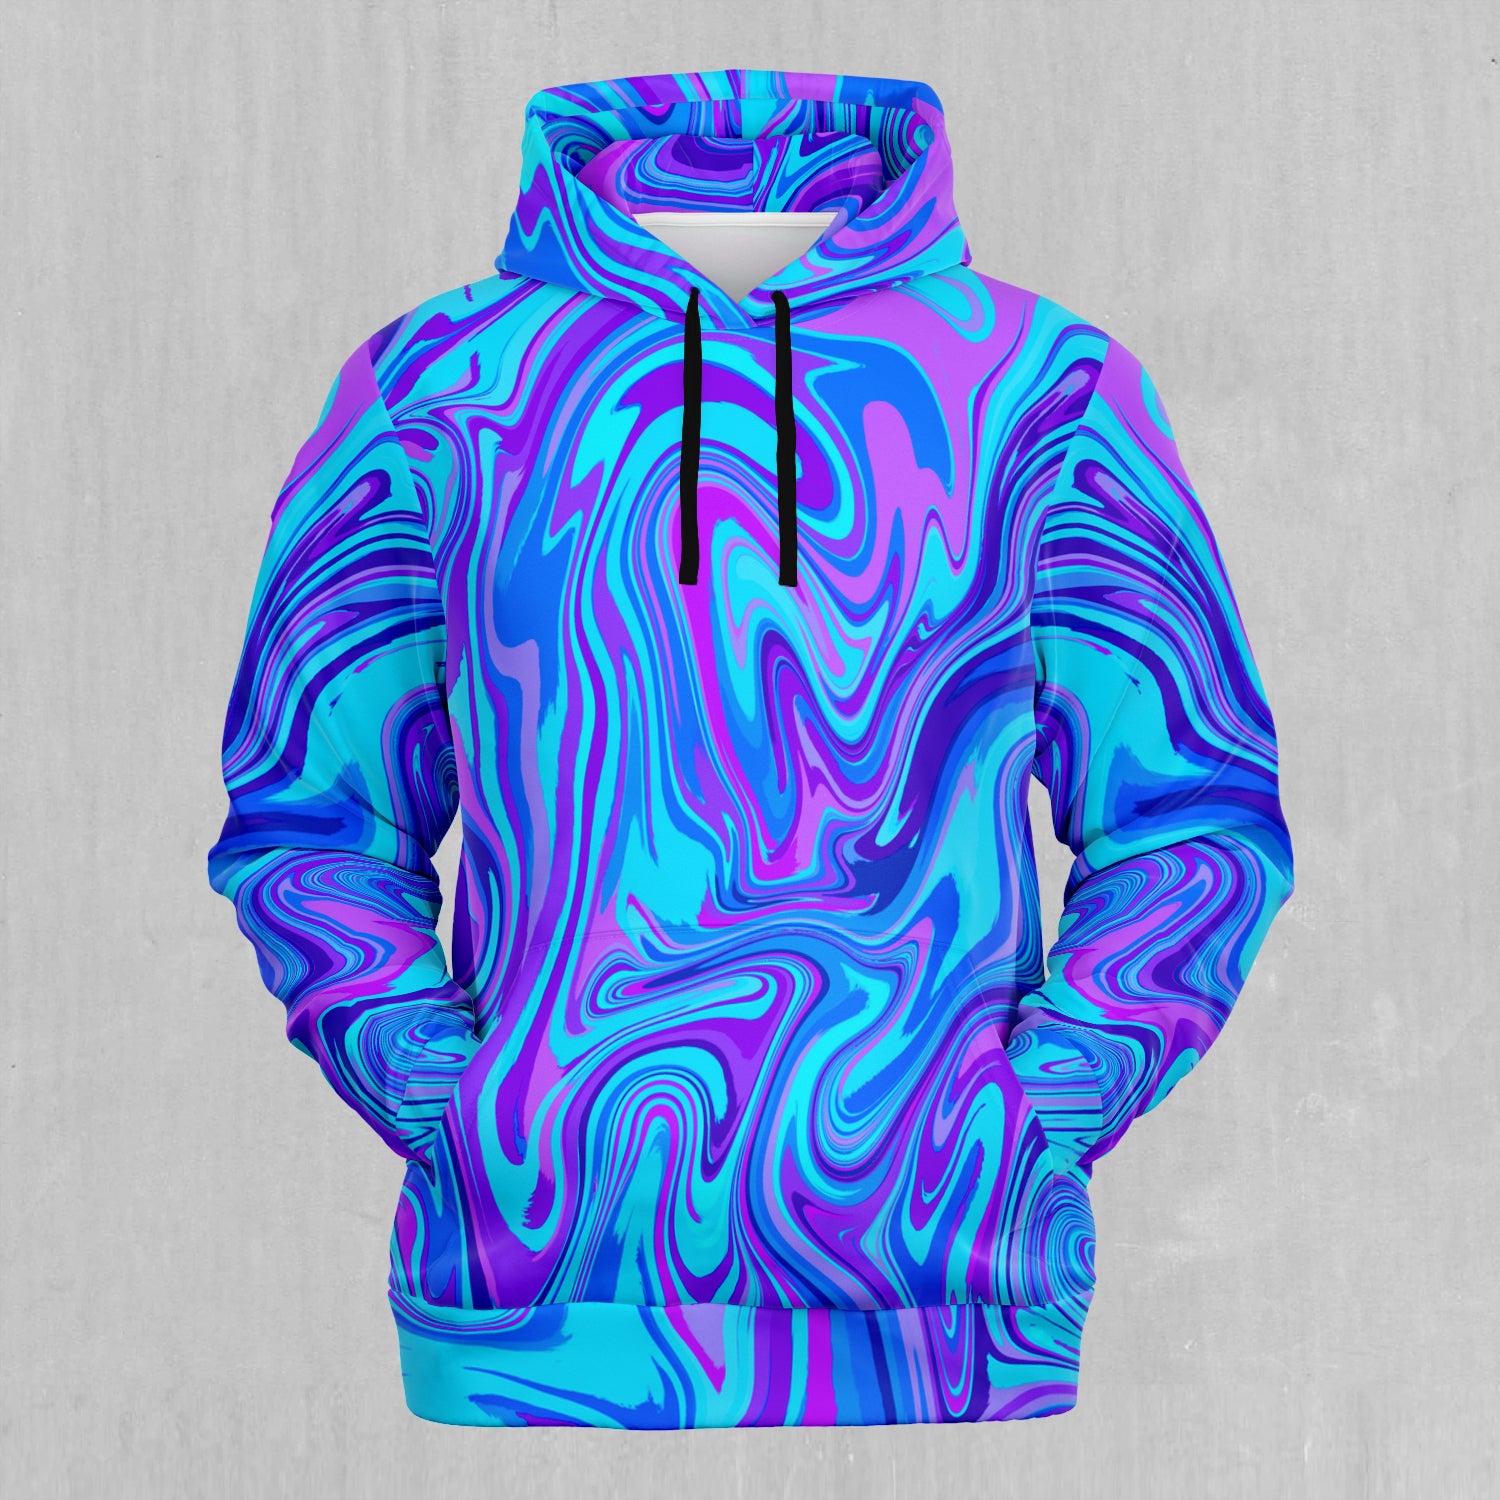 Vapor Drip Hoodie - Festival Clothing, Rave Outfits, EDM Gear